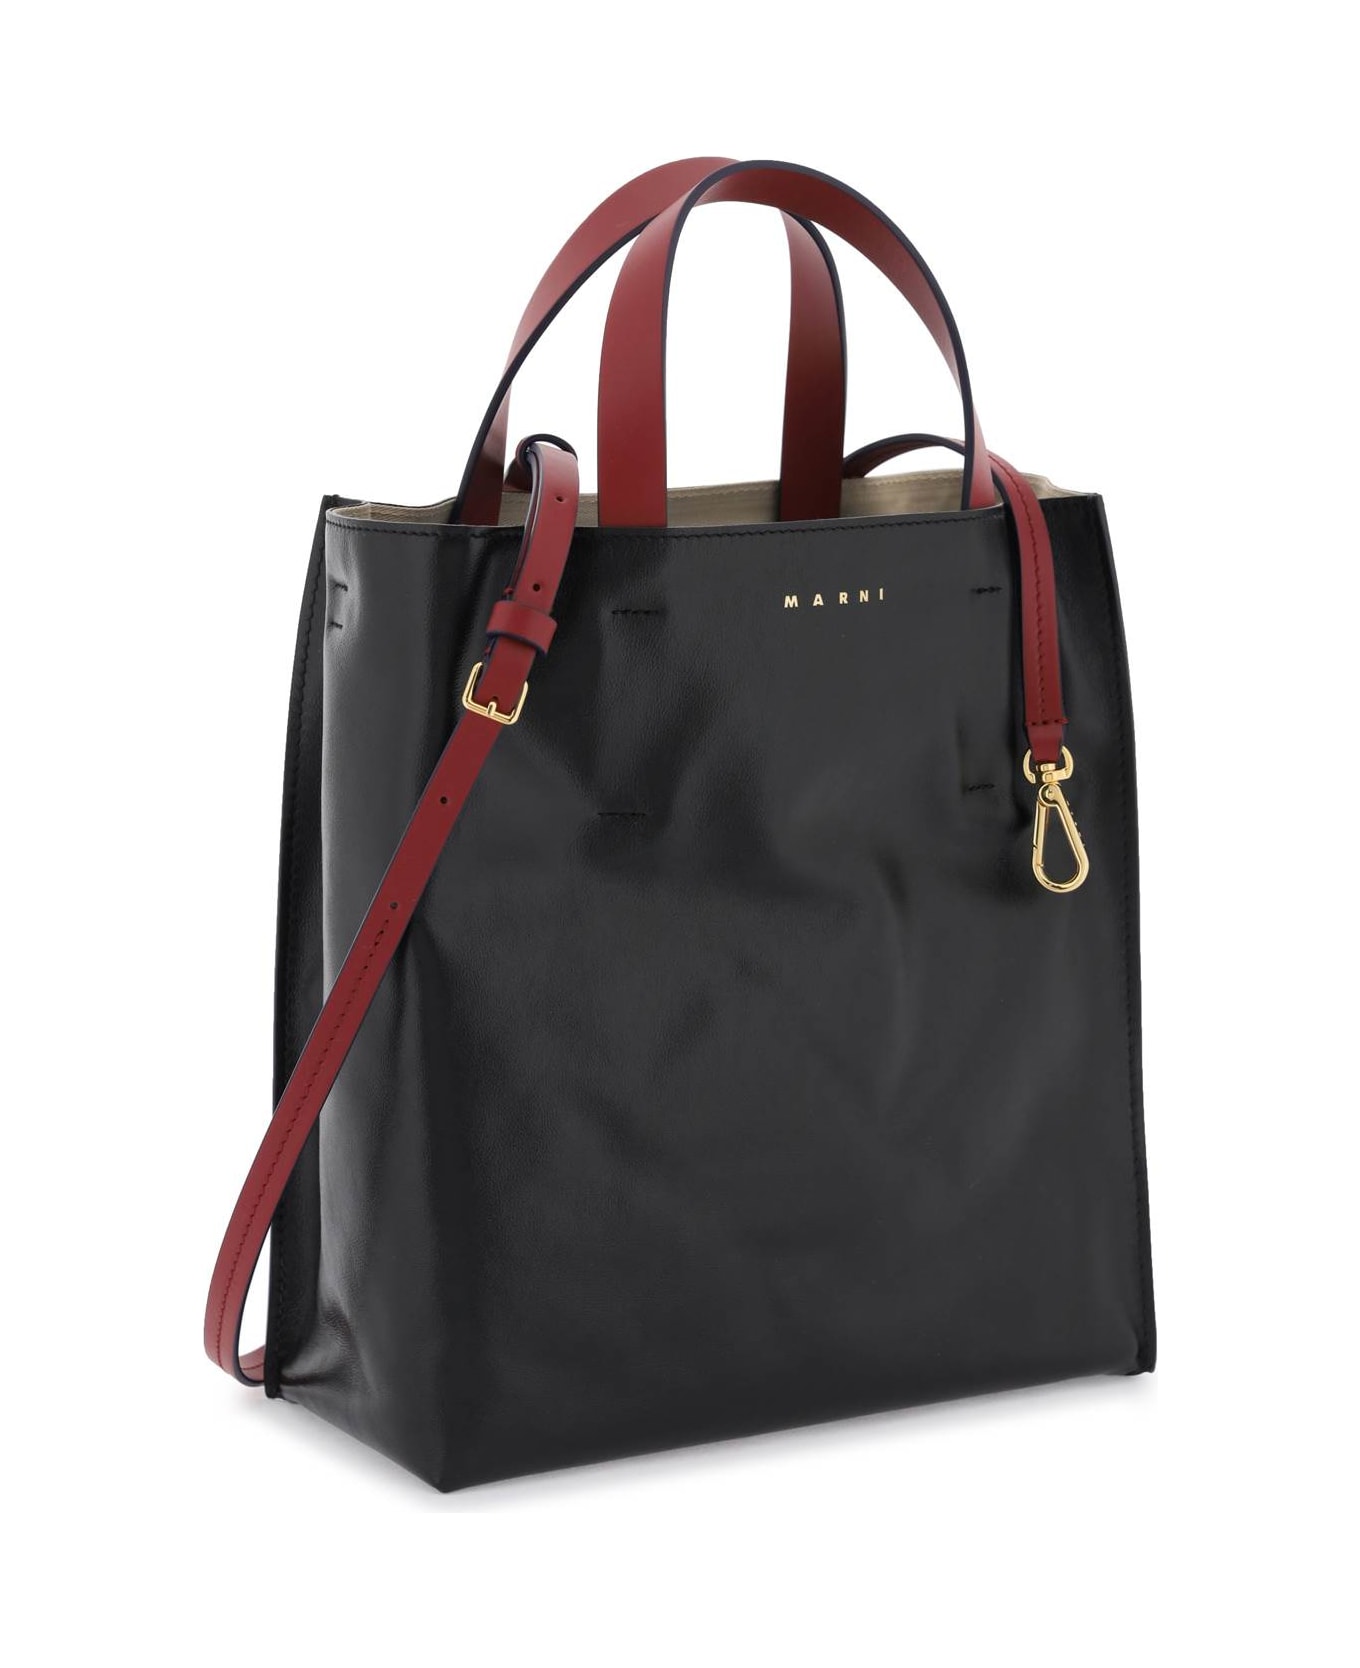 Marni Museo Bag In Black Leather - Black トートバッグ